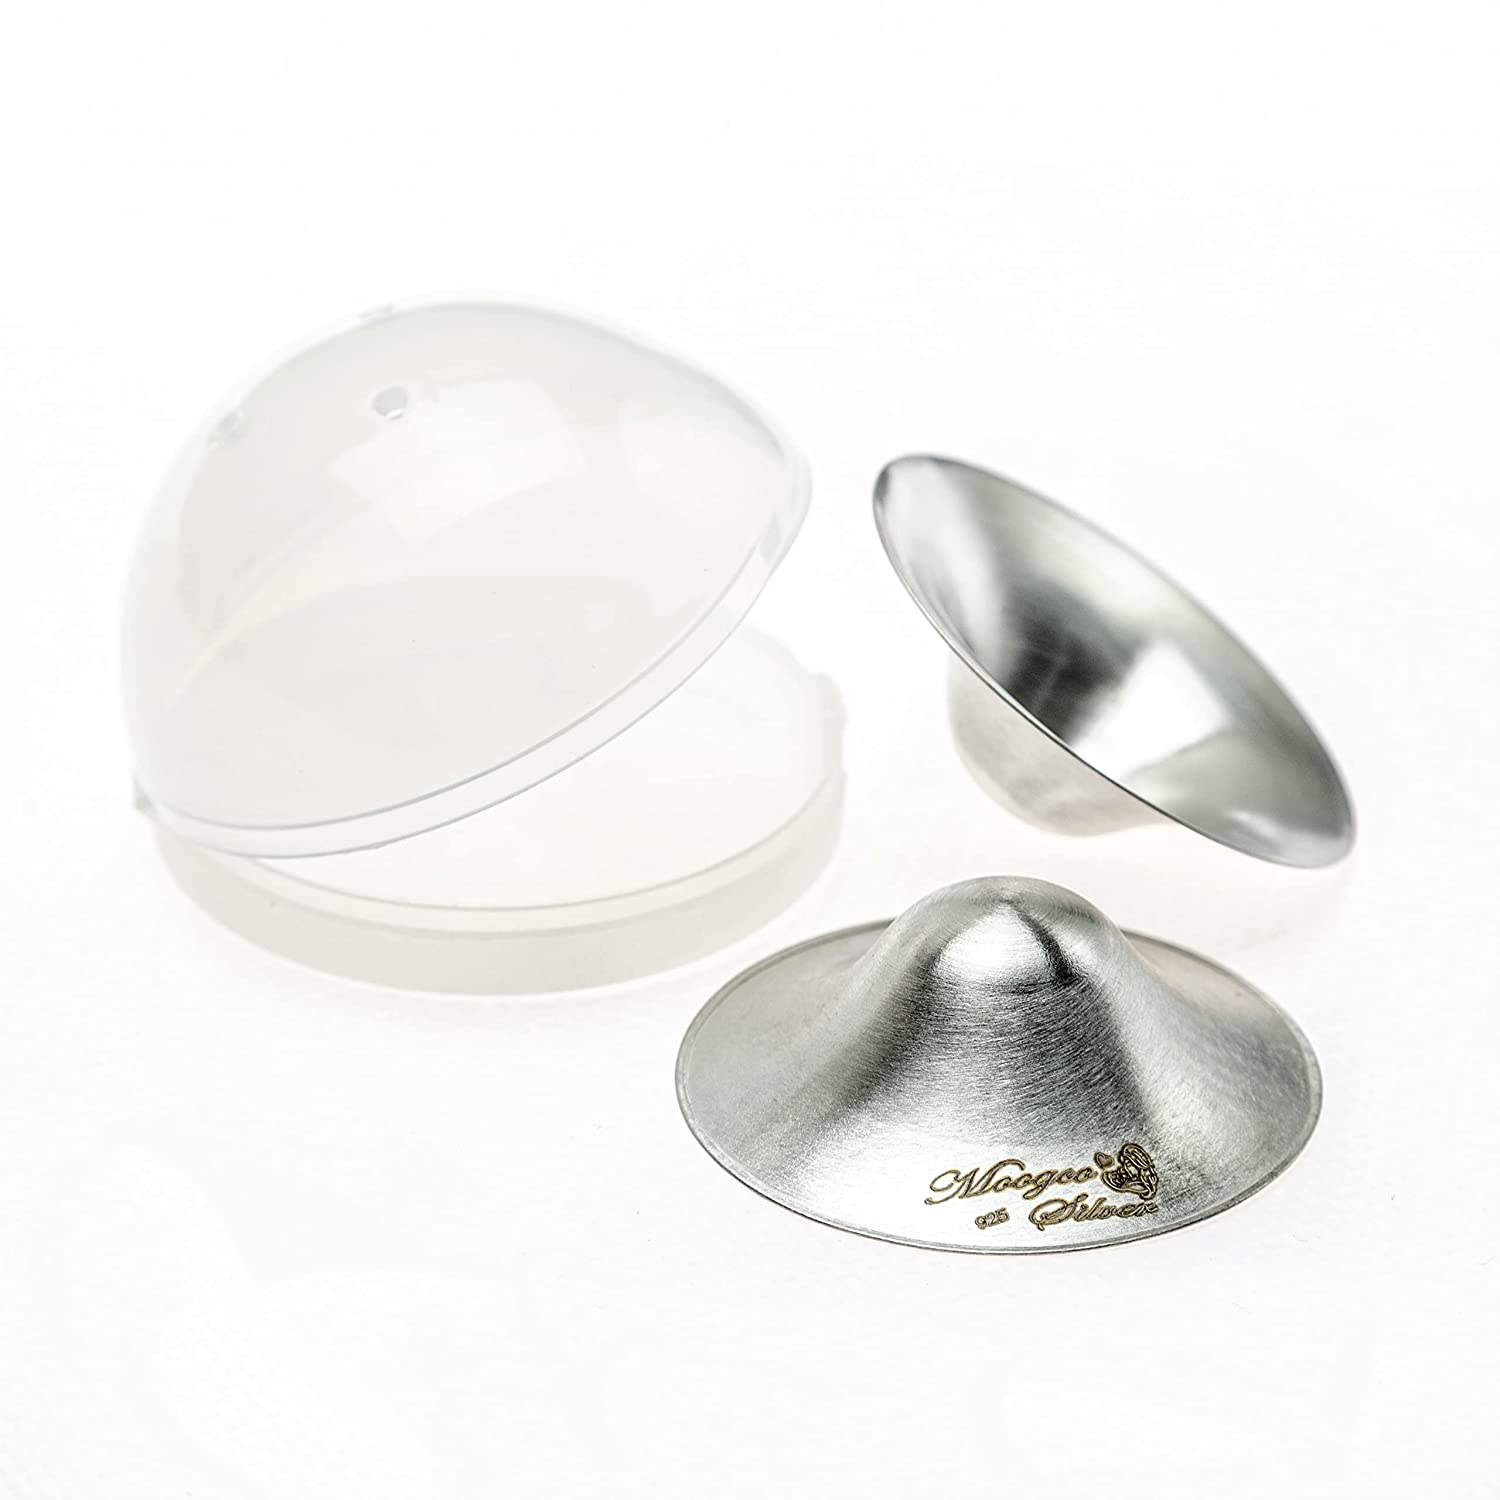 Amorini Silver Nipple Soothers for Breastfeeding Mothers